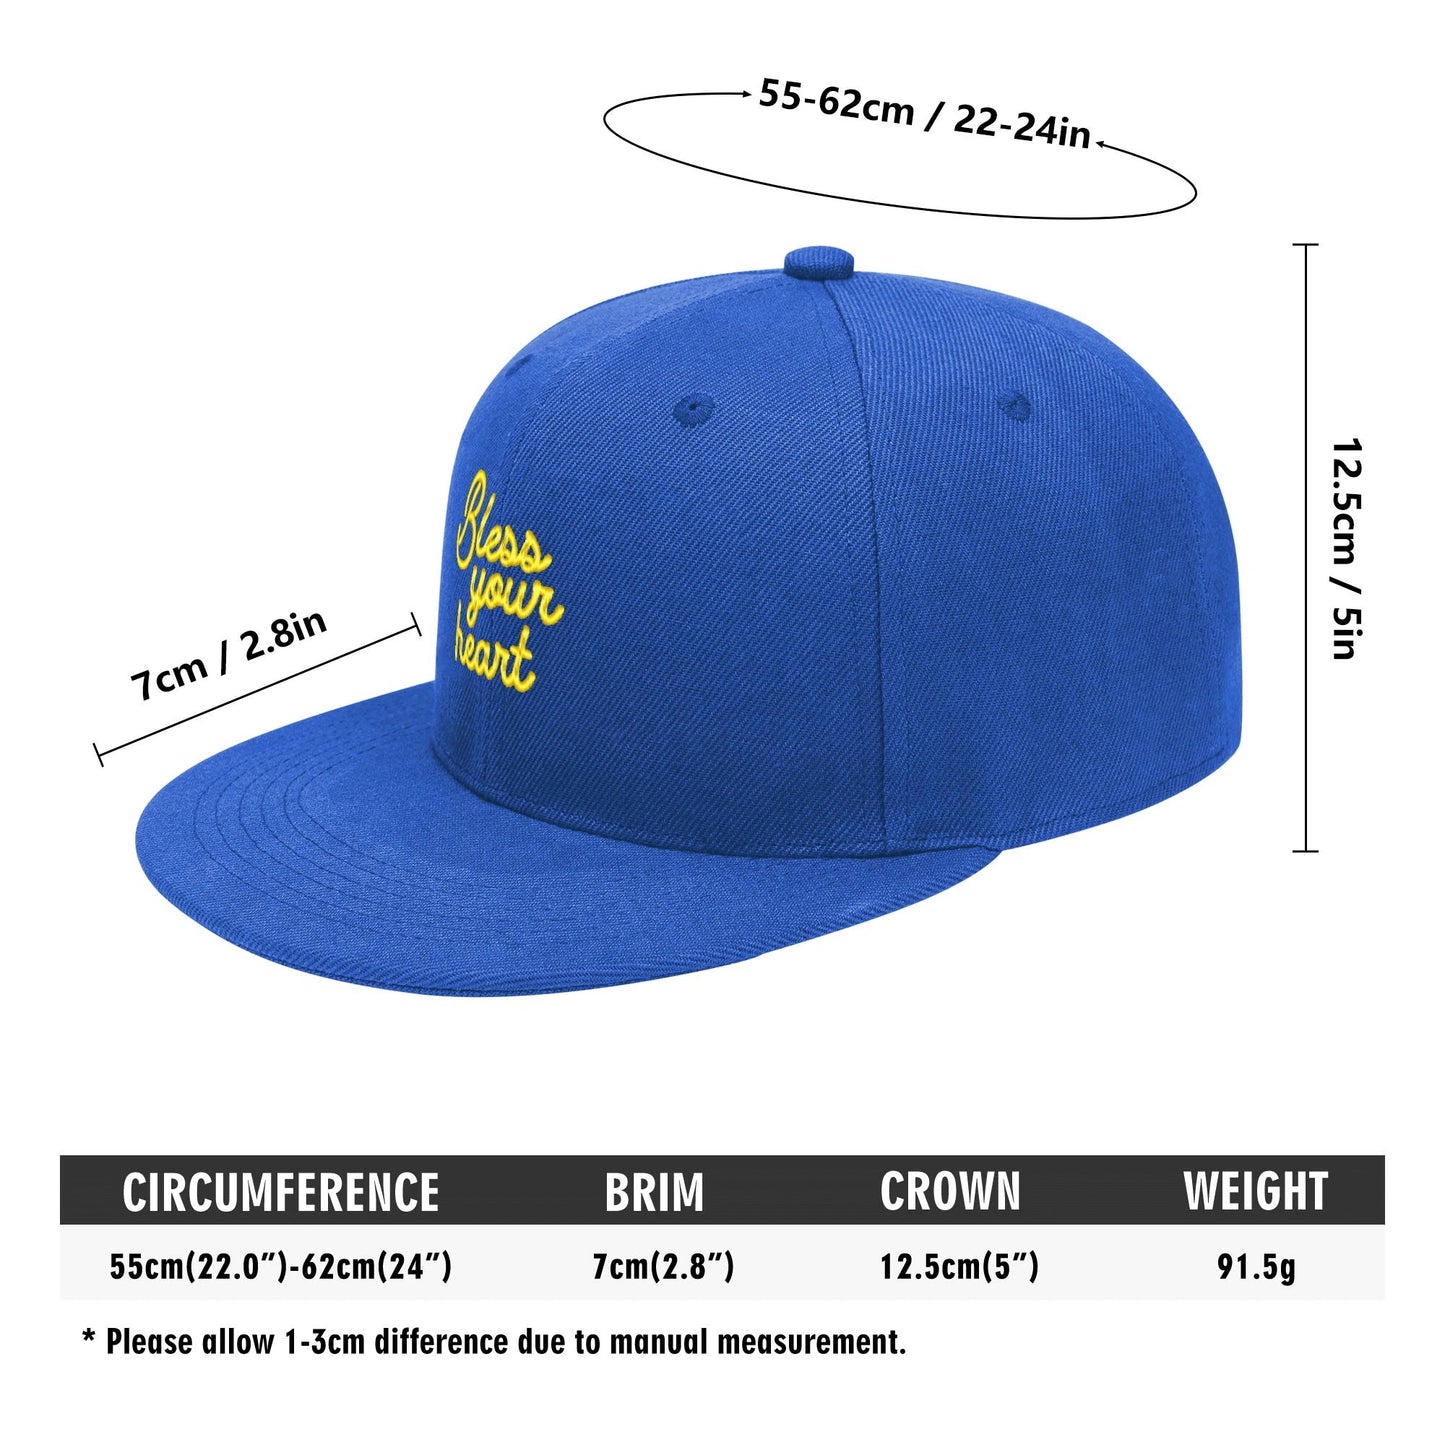 Bless Your Heart Scripted flat bill hat